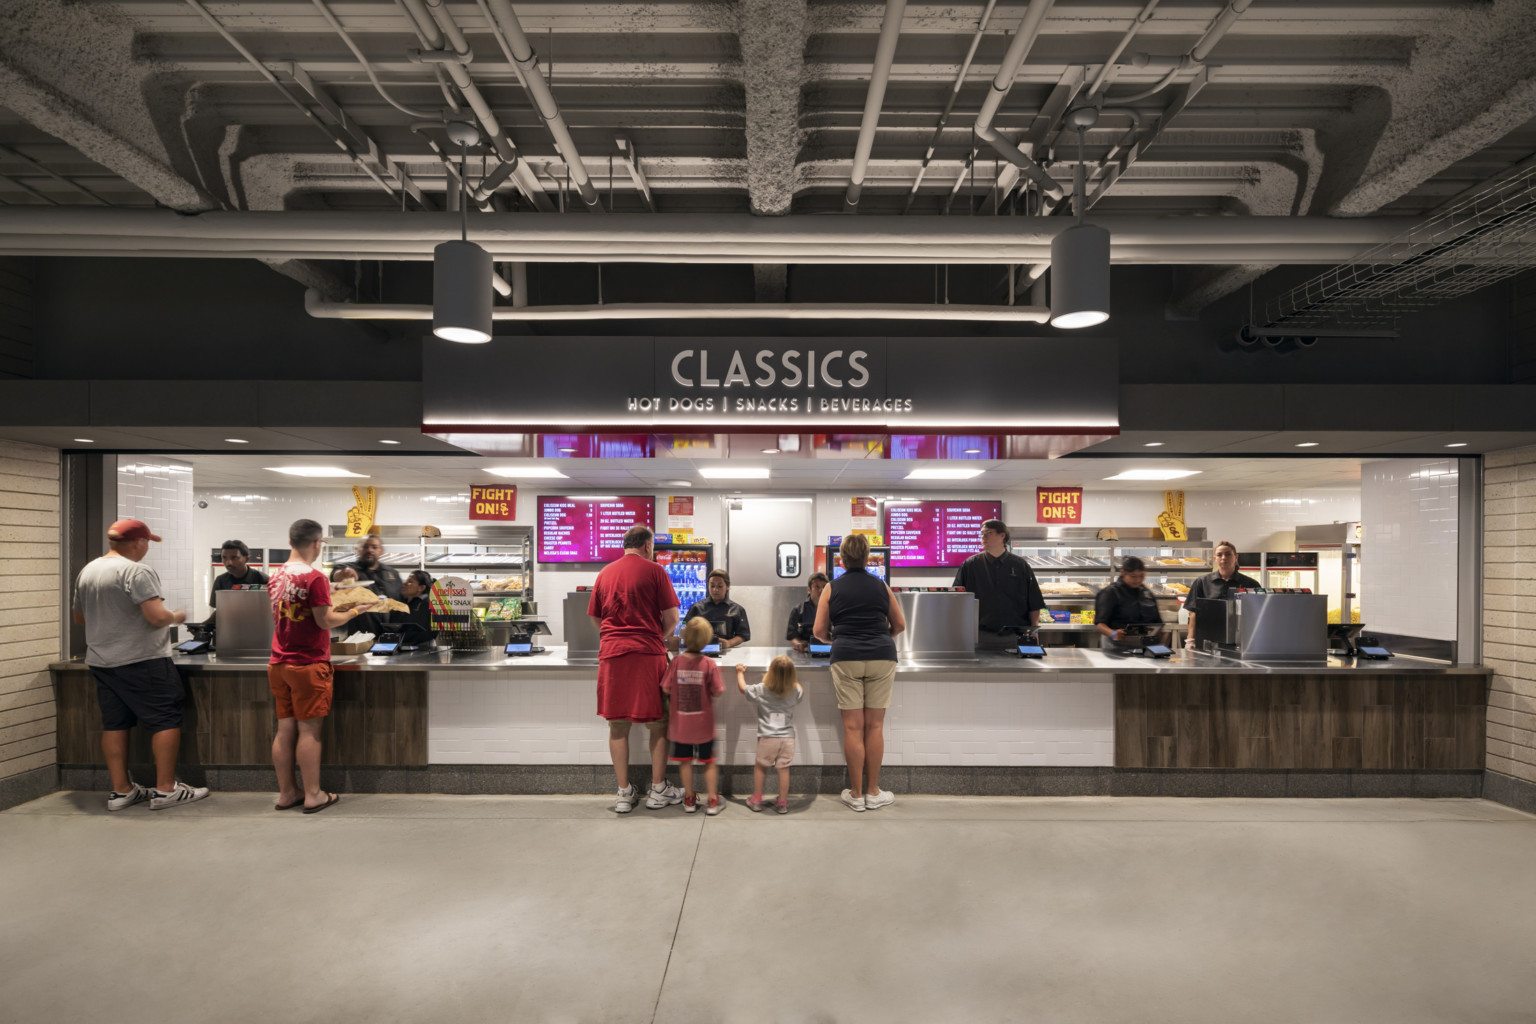 Concessions stand labeled Classics: Hot Dogs, Snacks, Beverages. Stainless steel counter on white and wood base